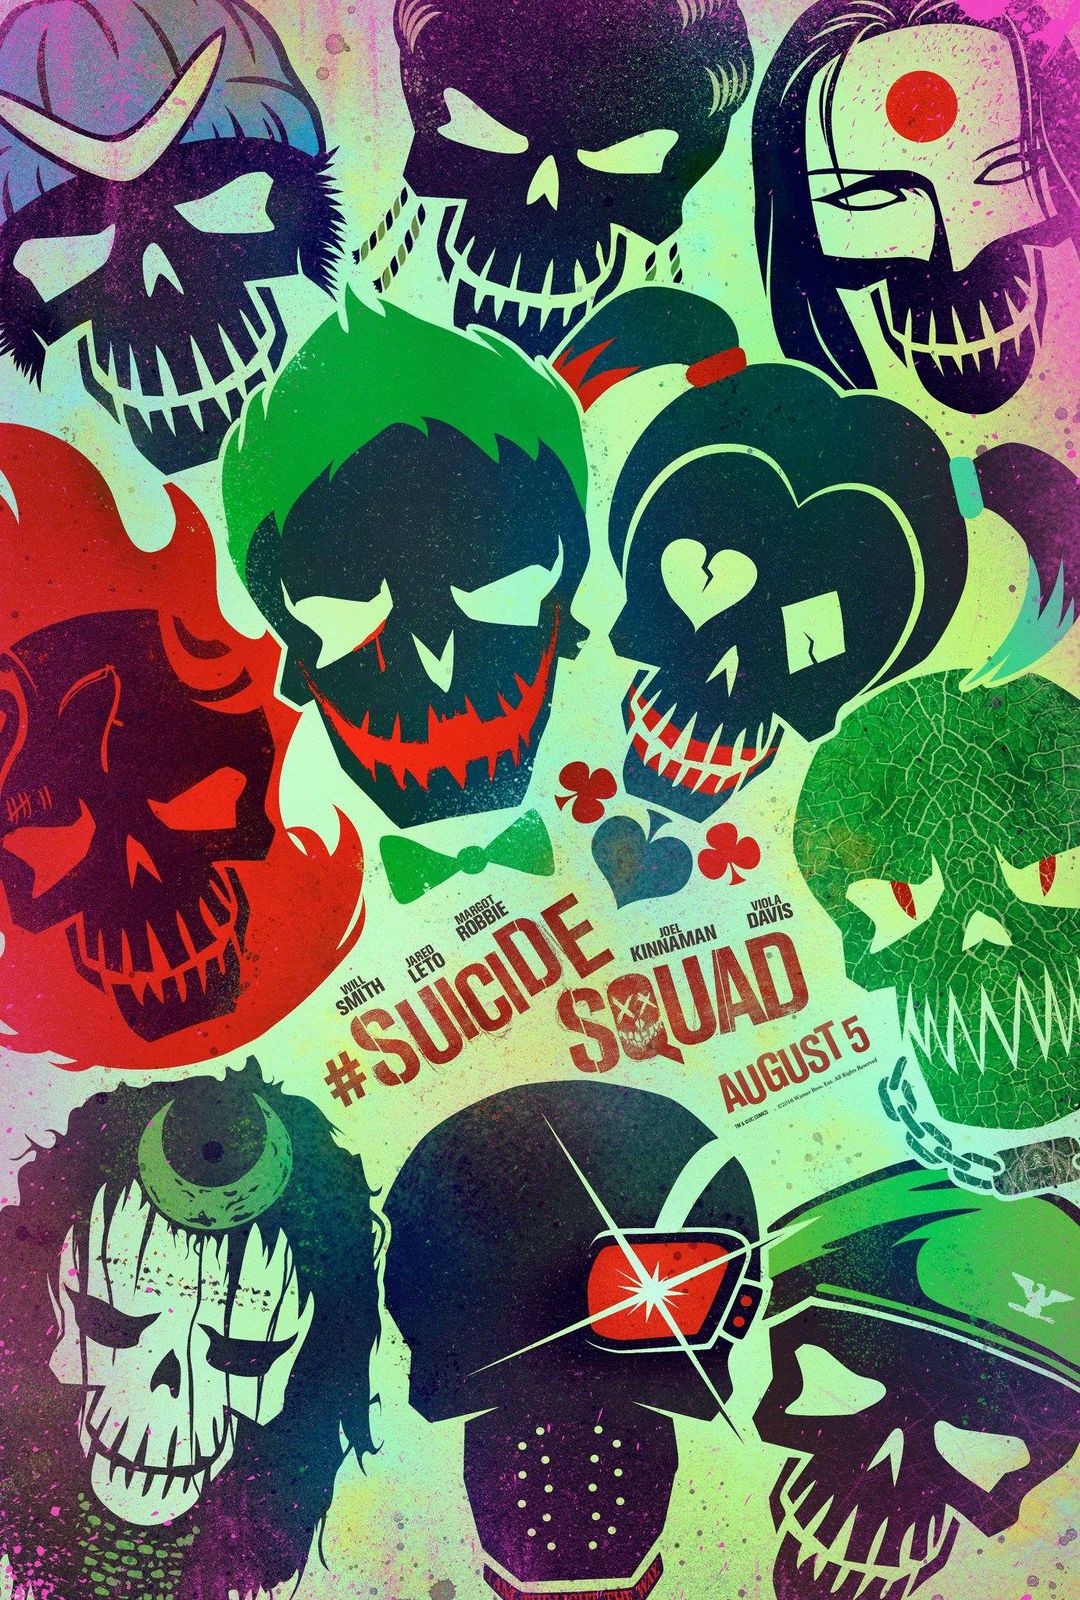 Suicide Squad Poster Revealed